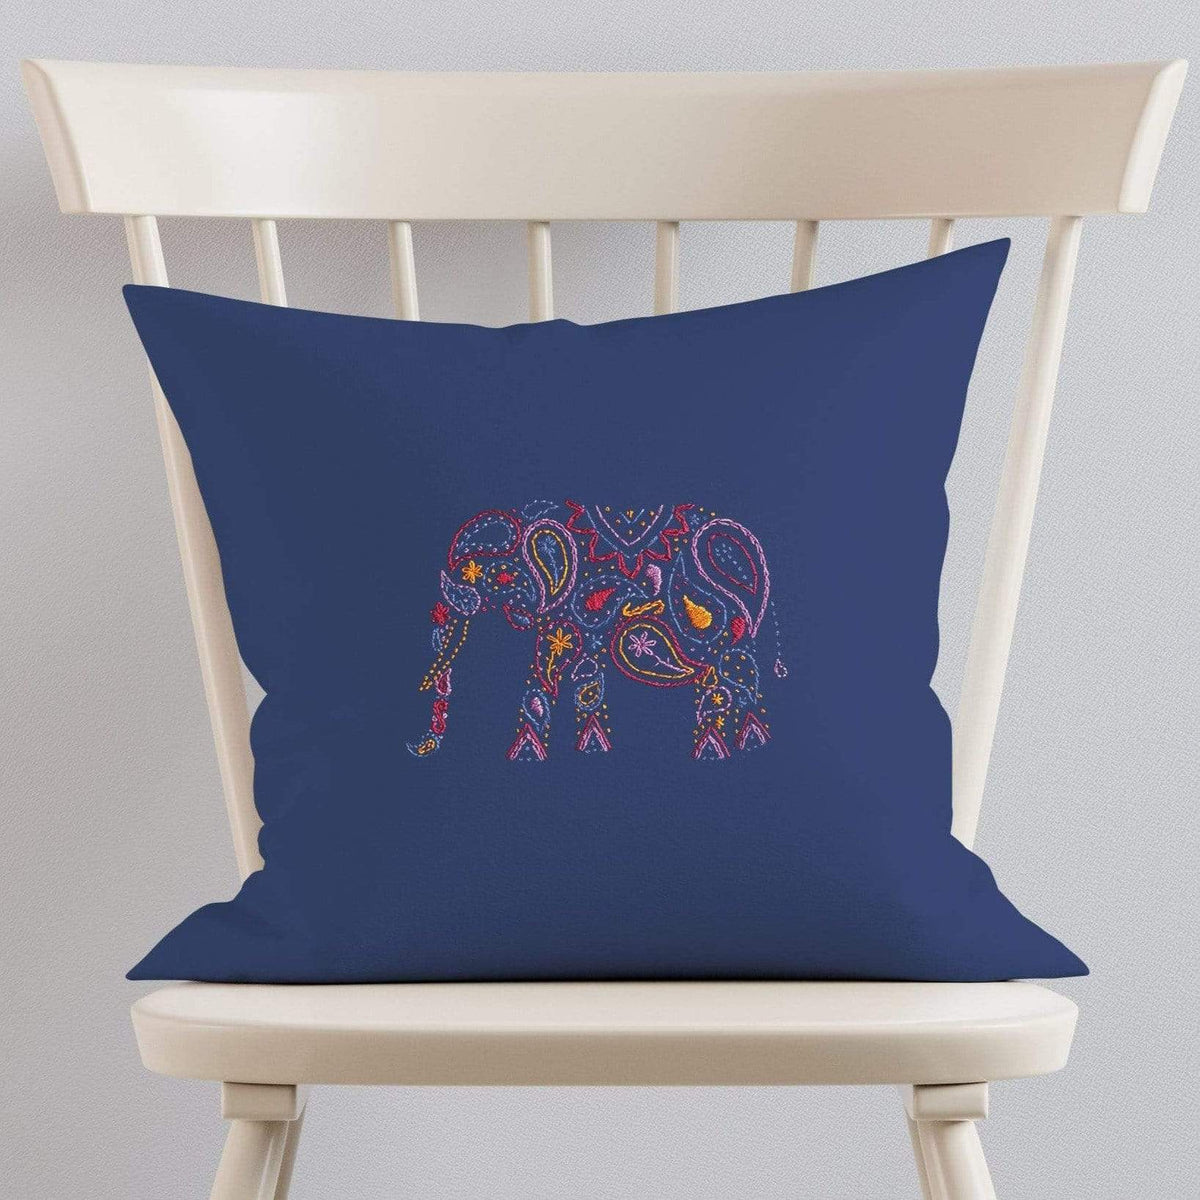 Elephant embroidery pattern stitched on a cushion